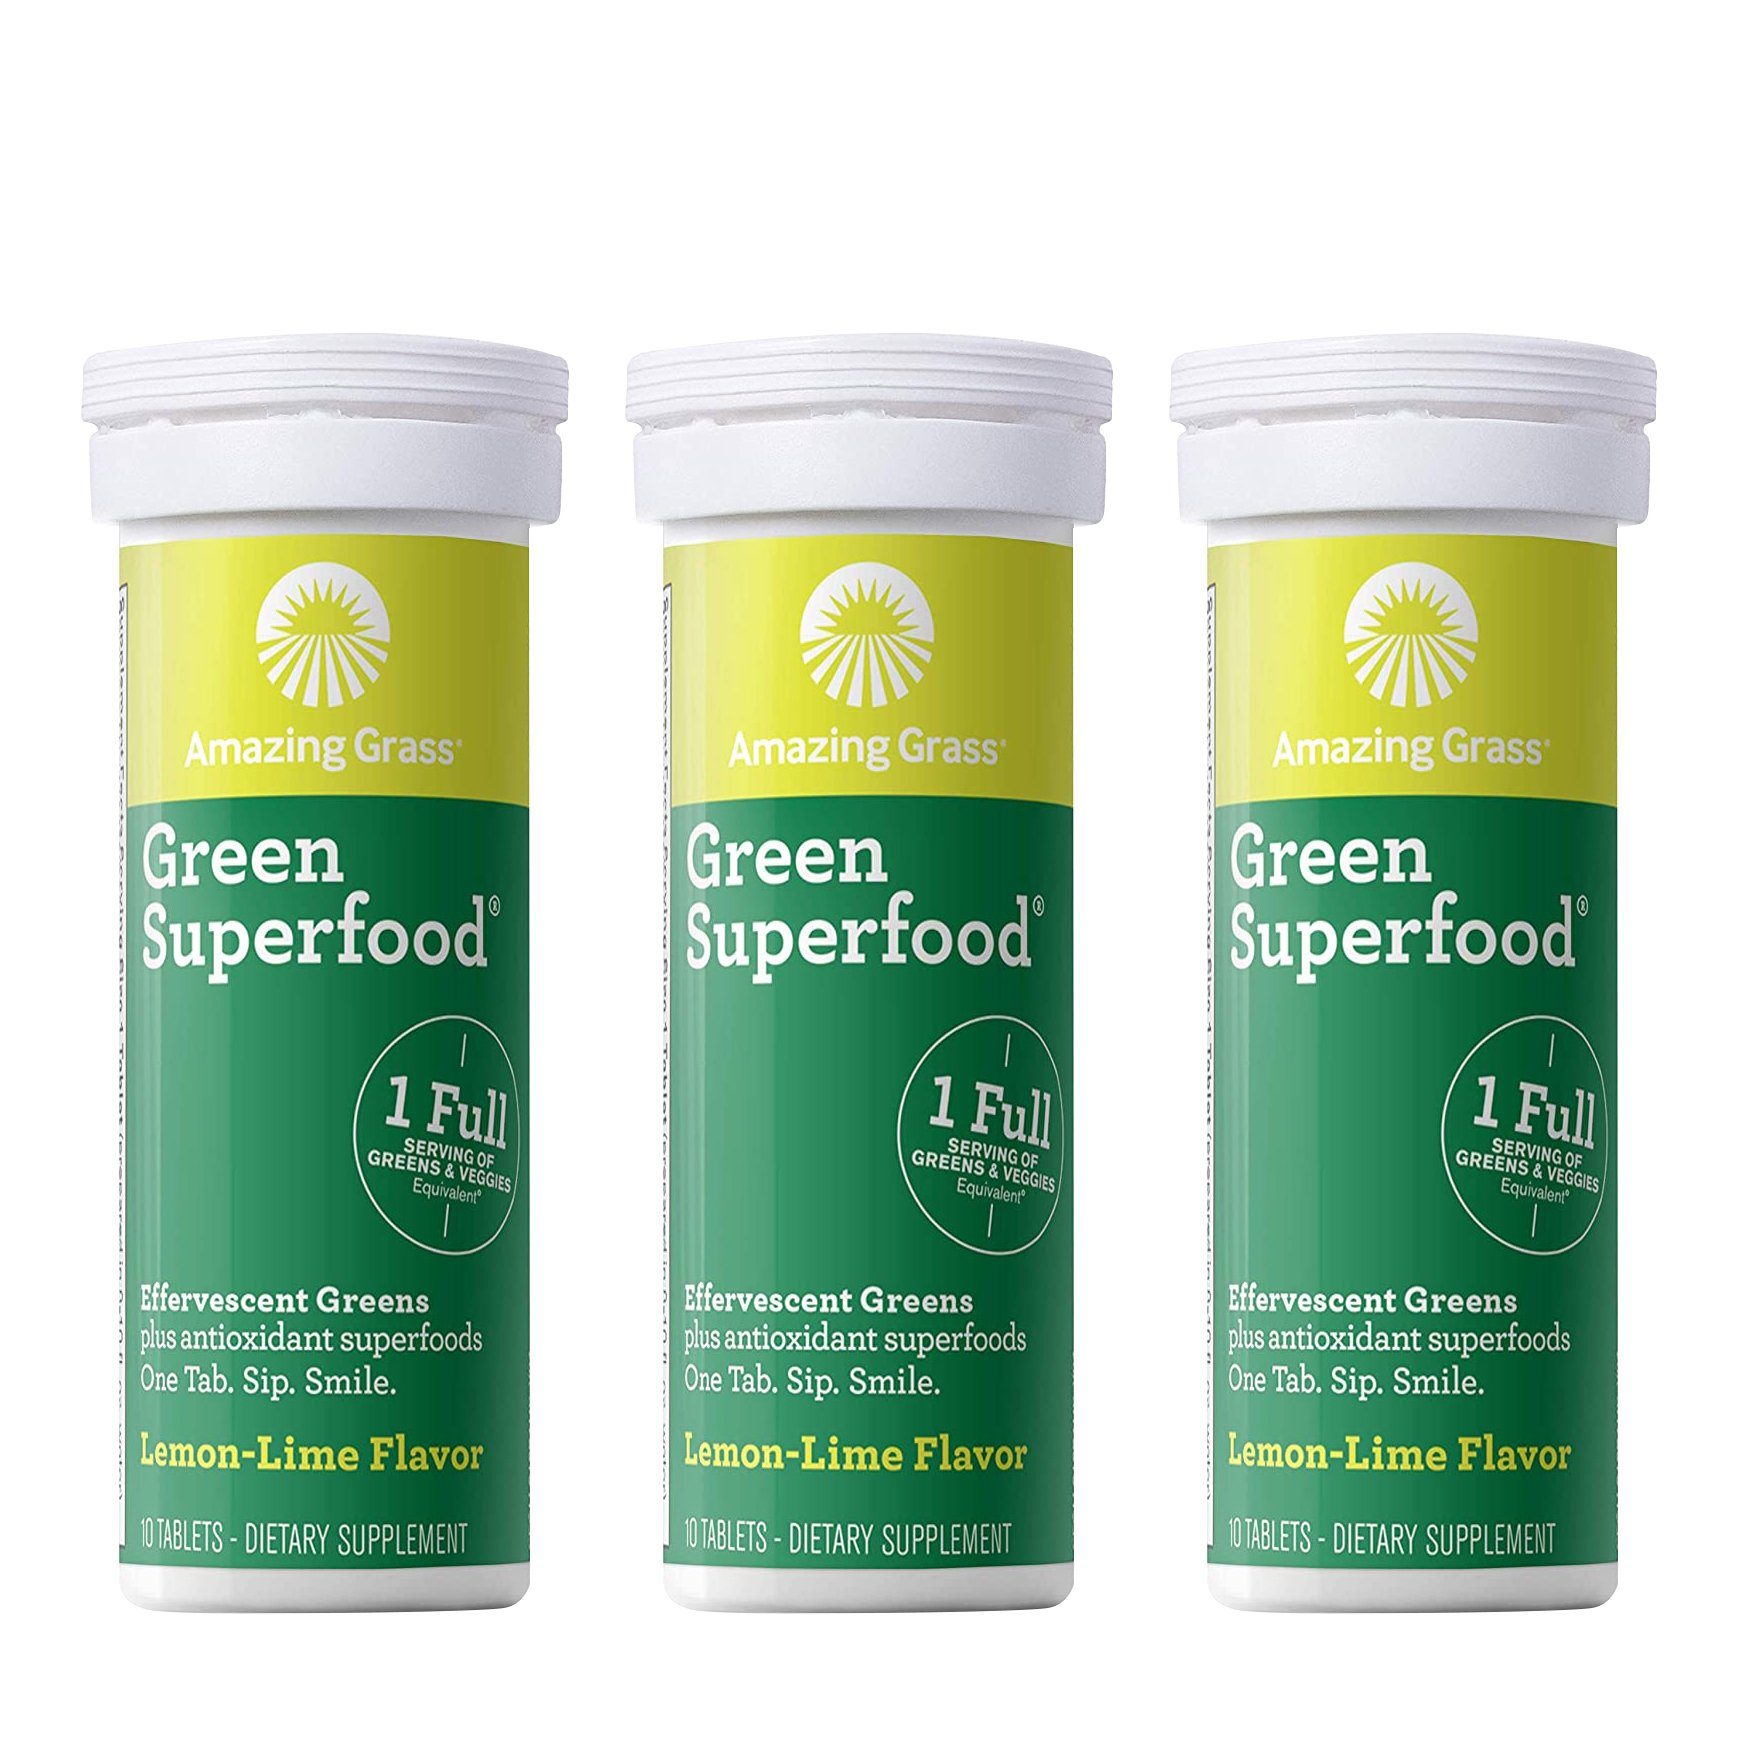 Amazing Grass Green Superfood Water Flavoring Tablet with Antioxidants and Alkalizing Greens / Lemon-Lime